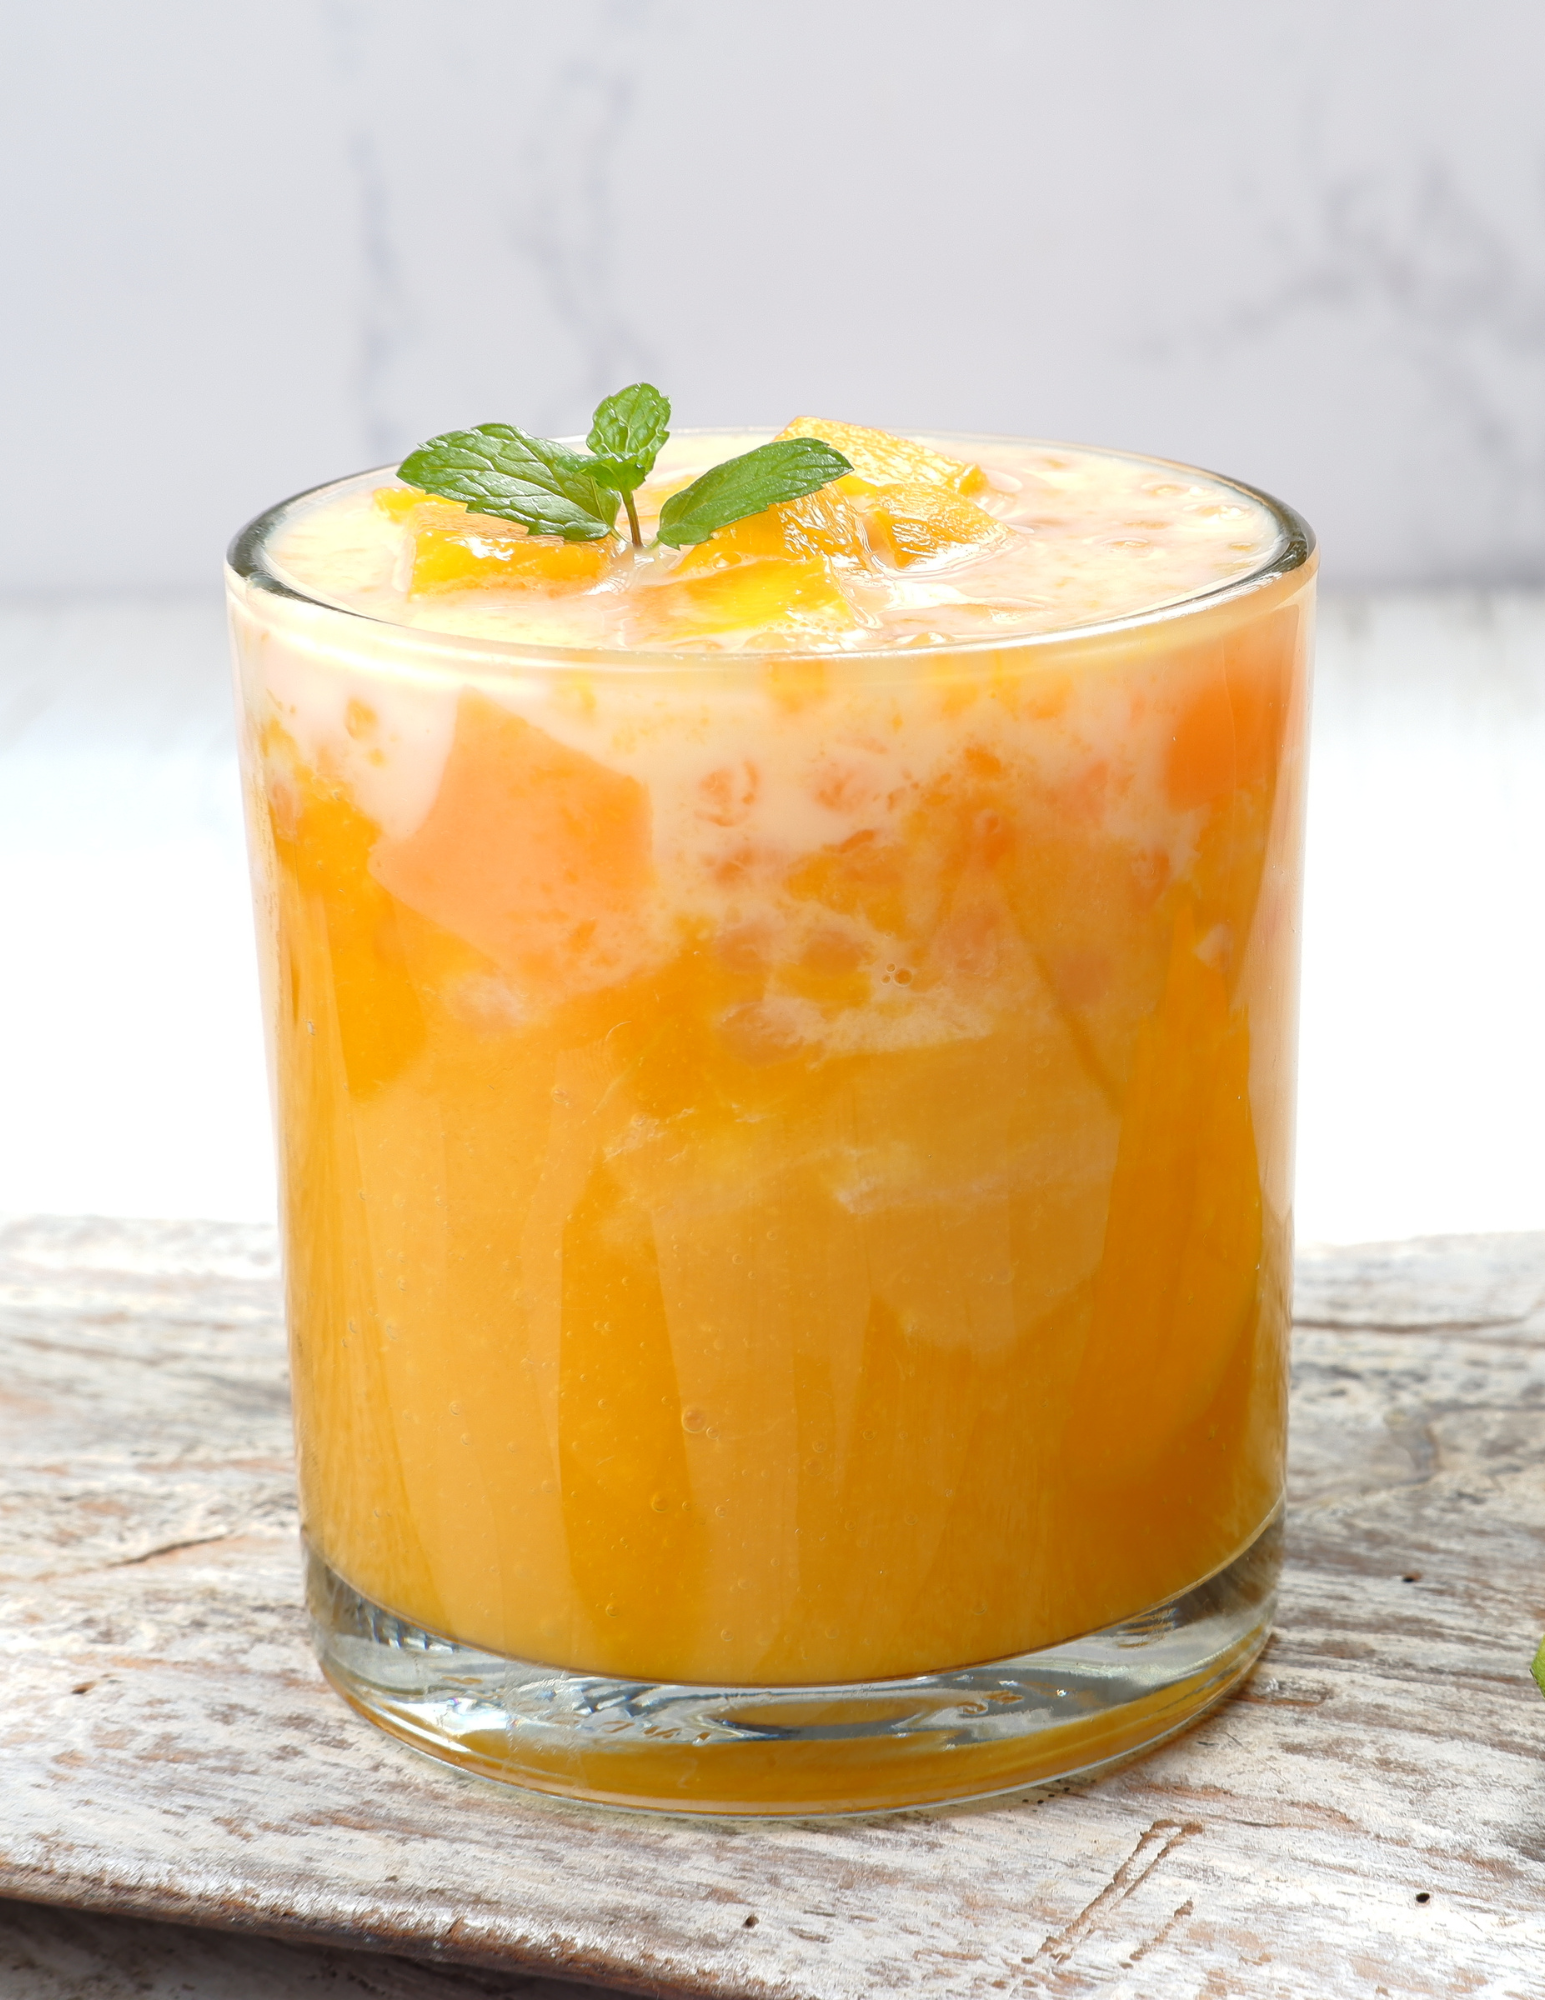 How to Make Mango Frose